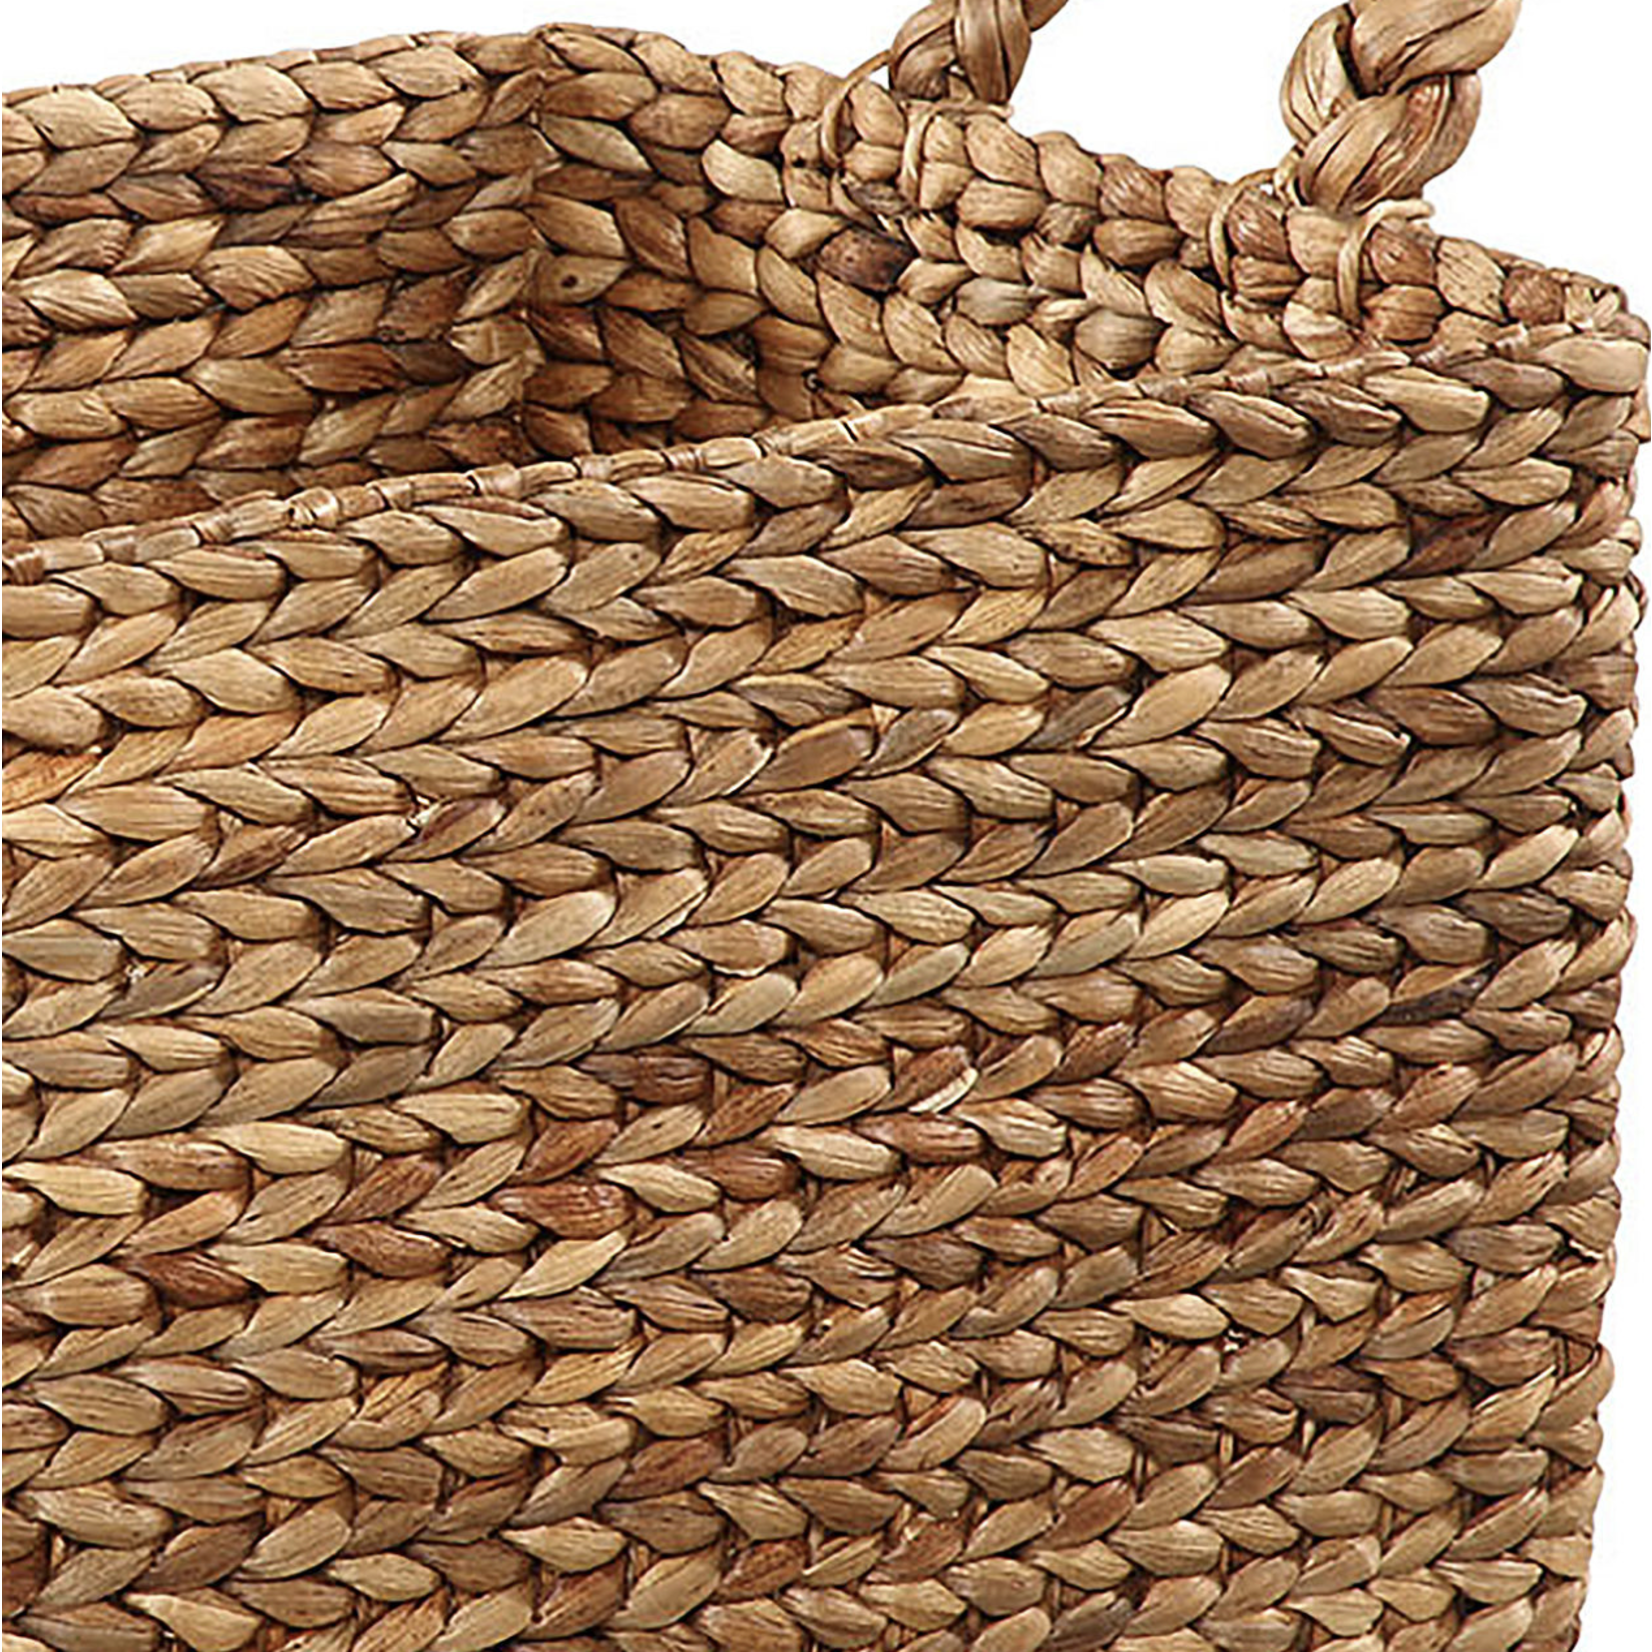 Outside The Box 27" Anapos Handwoven Water Hyacinth Basket